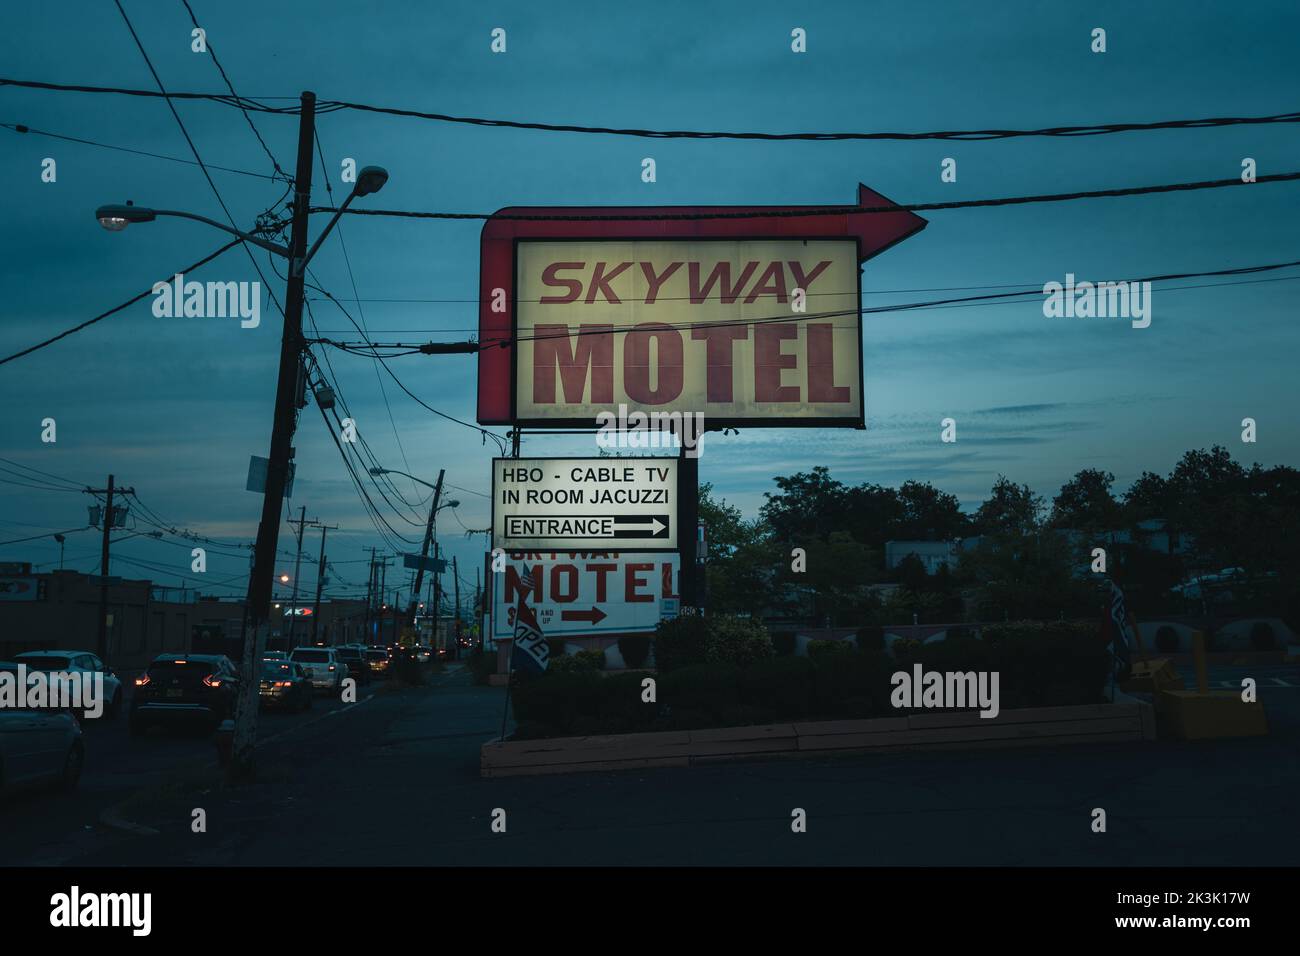 Skyway Motel sign at night, Jersey City, New Jersey Stock Photo